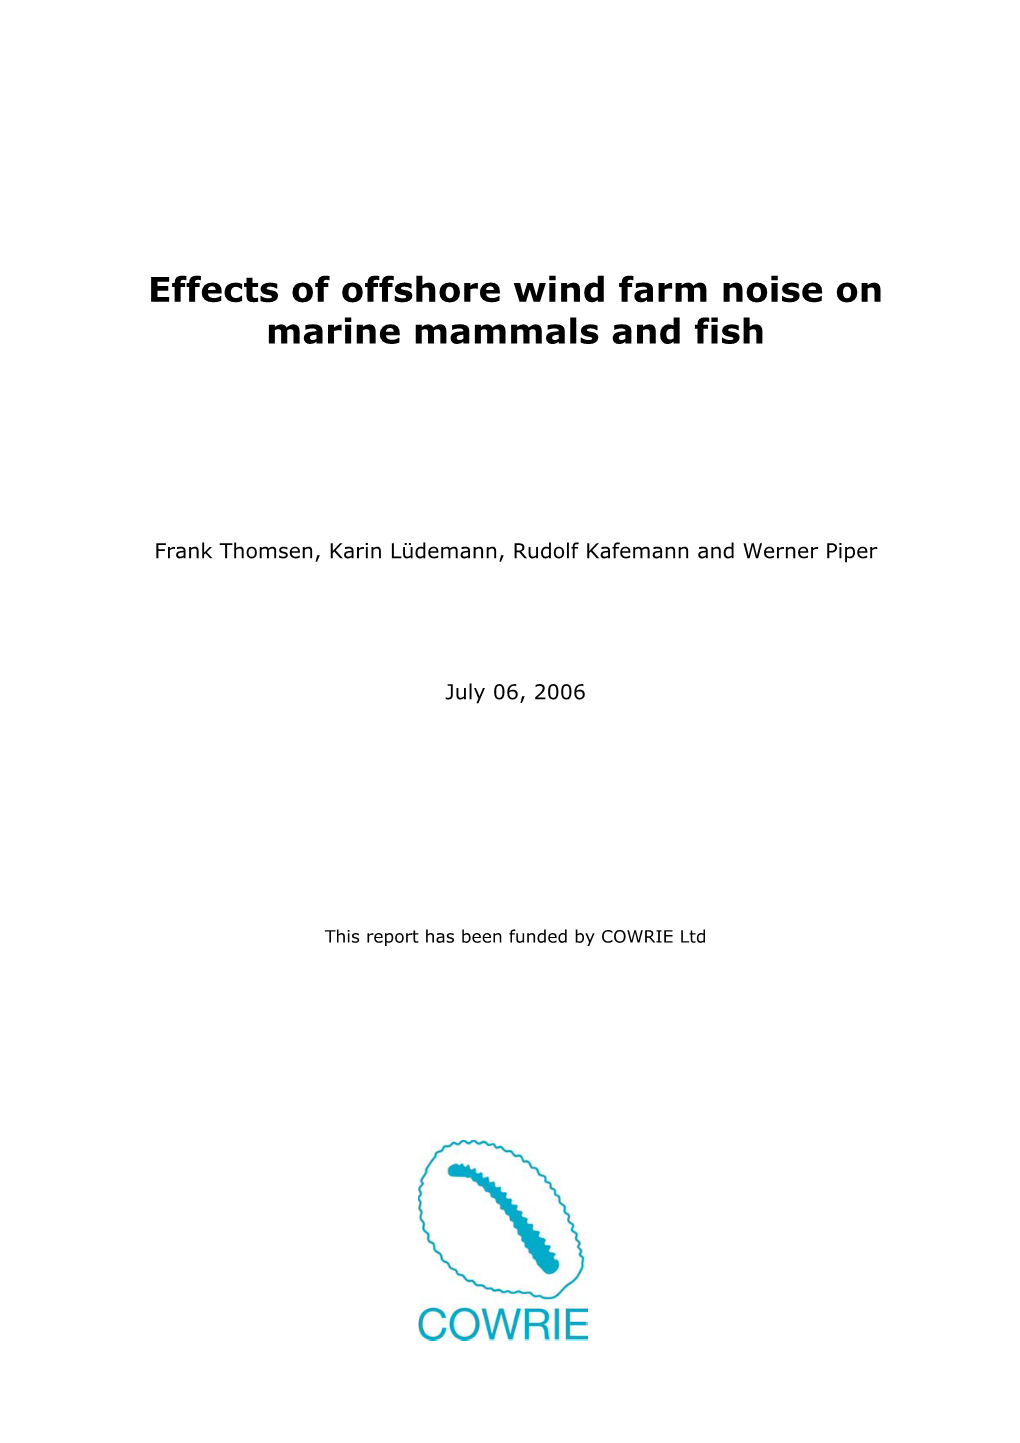 Effects of Offshore Wind Farm Noise on Marine Mammals and Fish